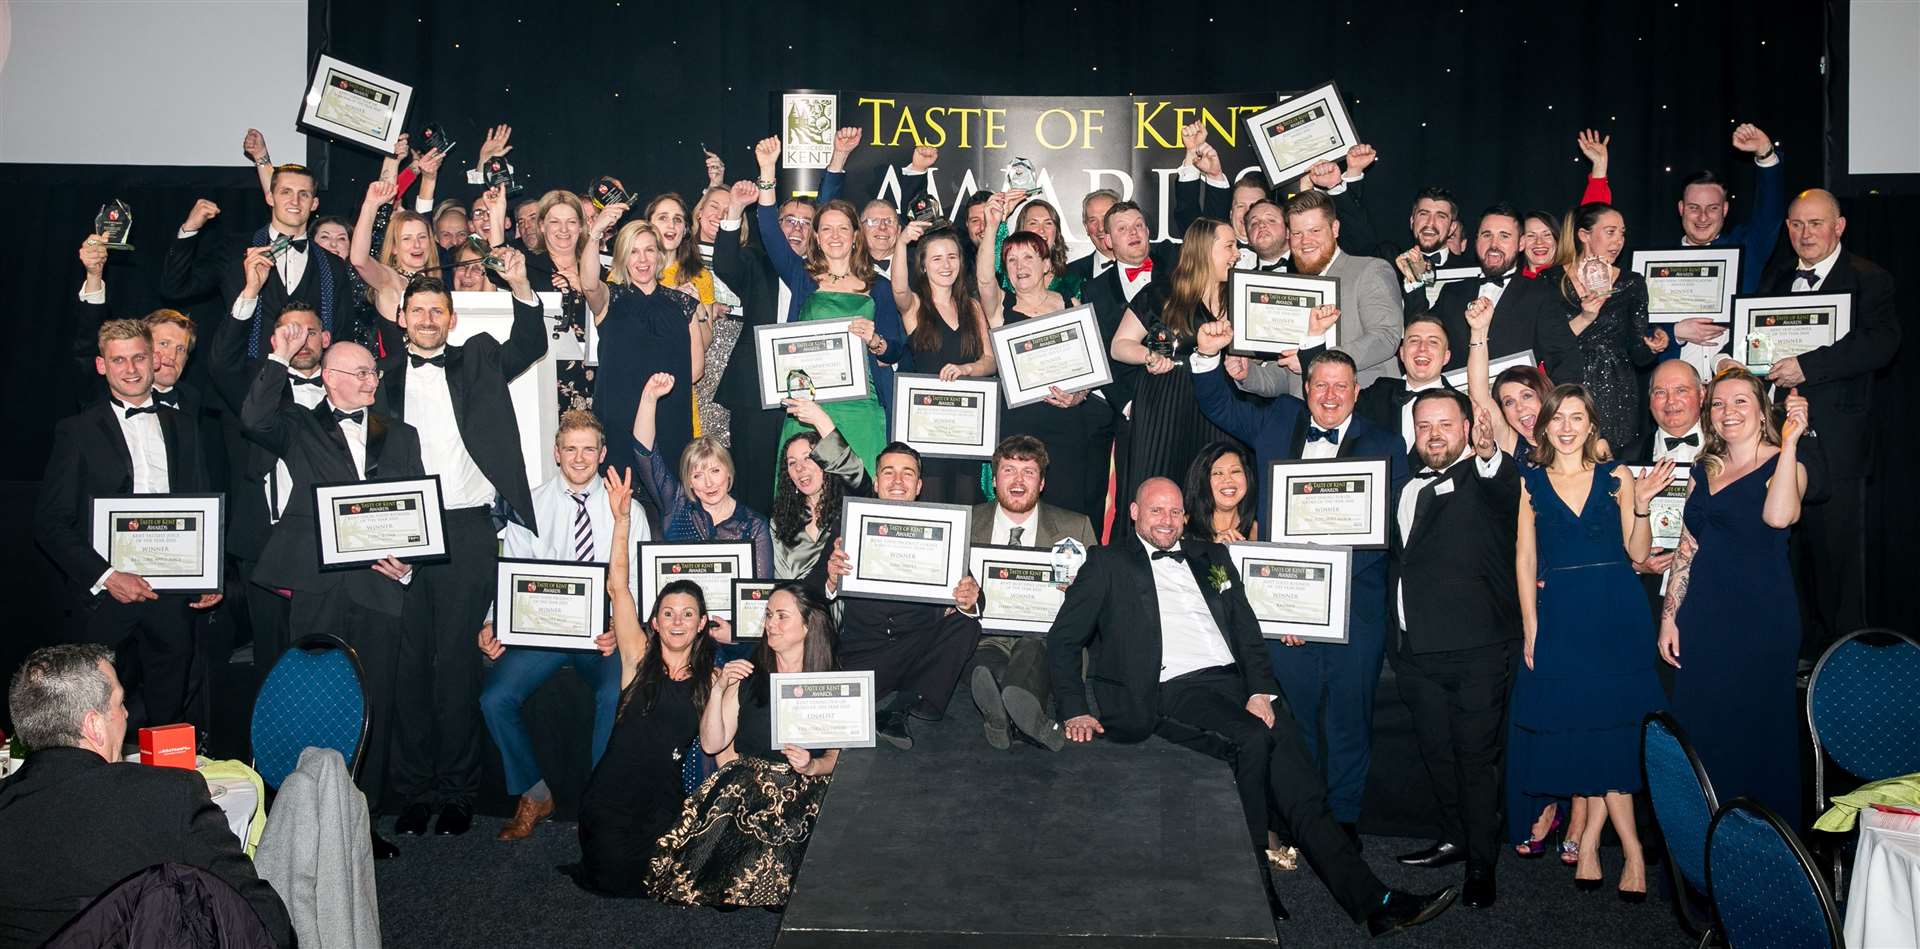 Winners of the Taste of Kent Awards in 2020 - this year's event will be held virtually